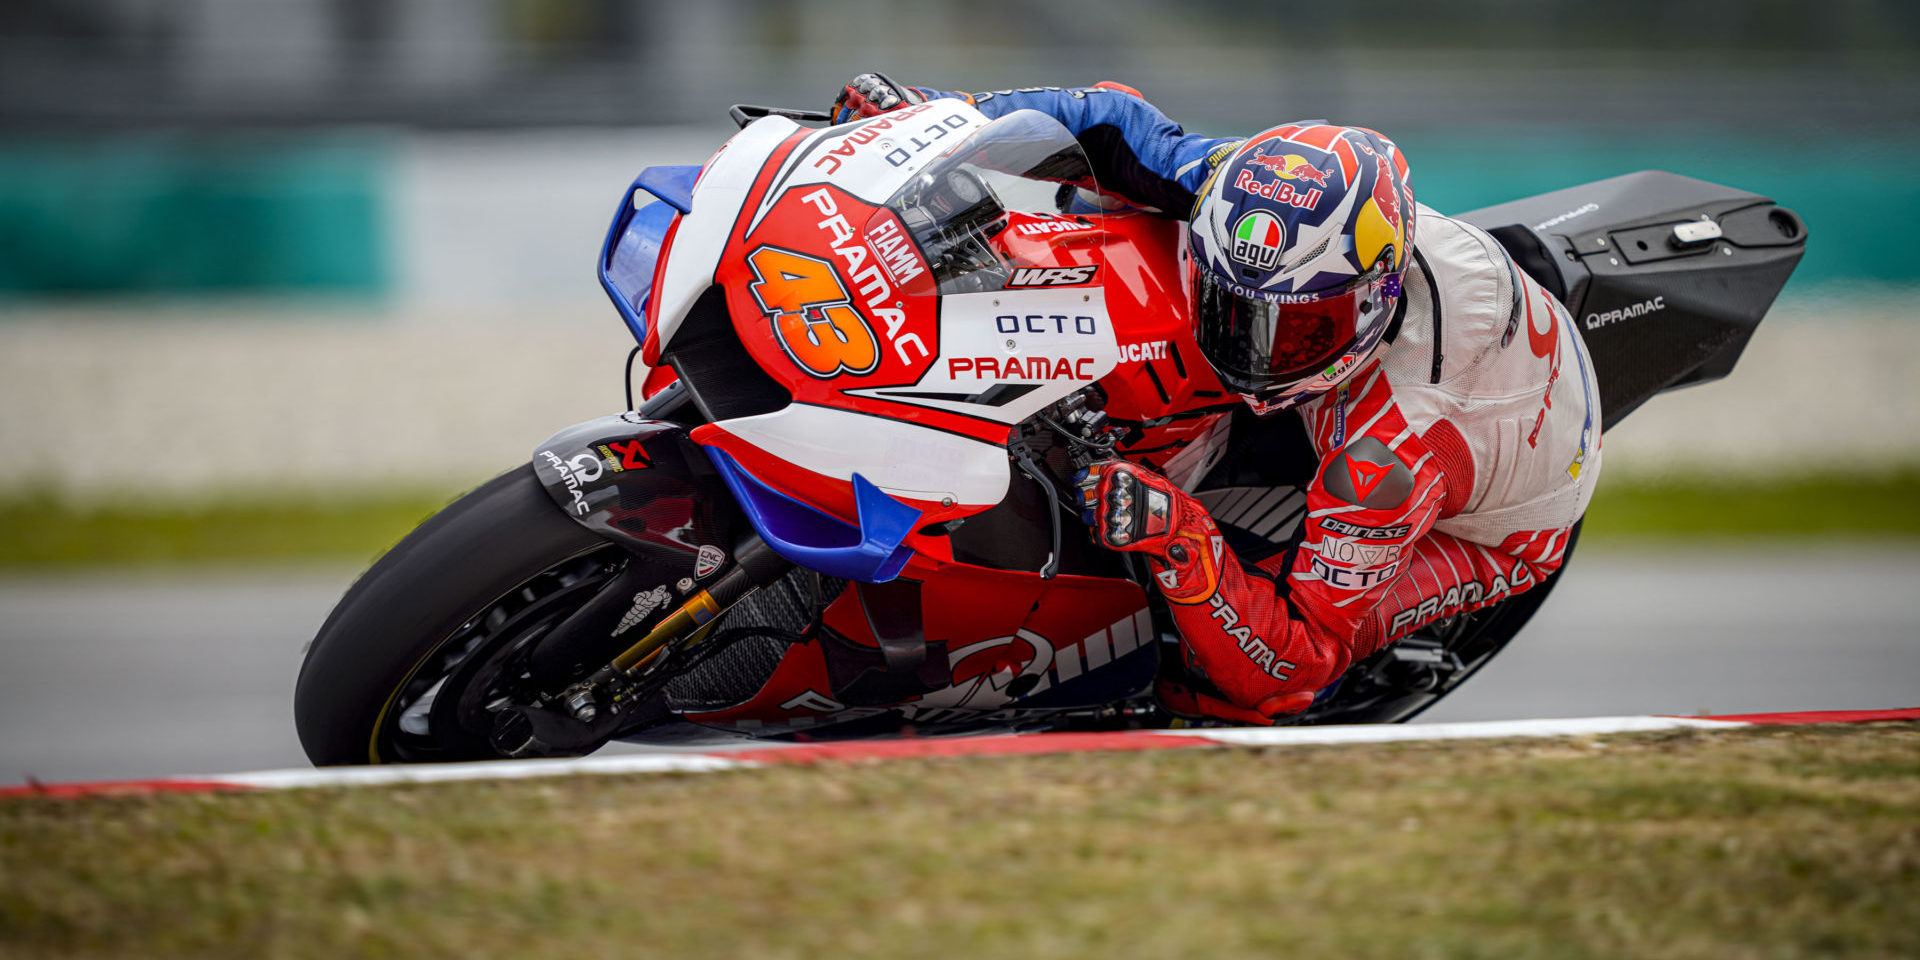 Jack Miller finishes first in the wet French MotoGP FP2